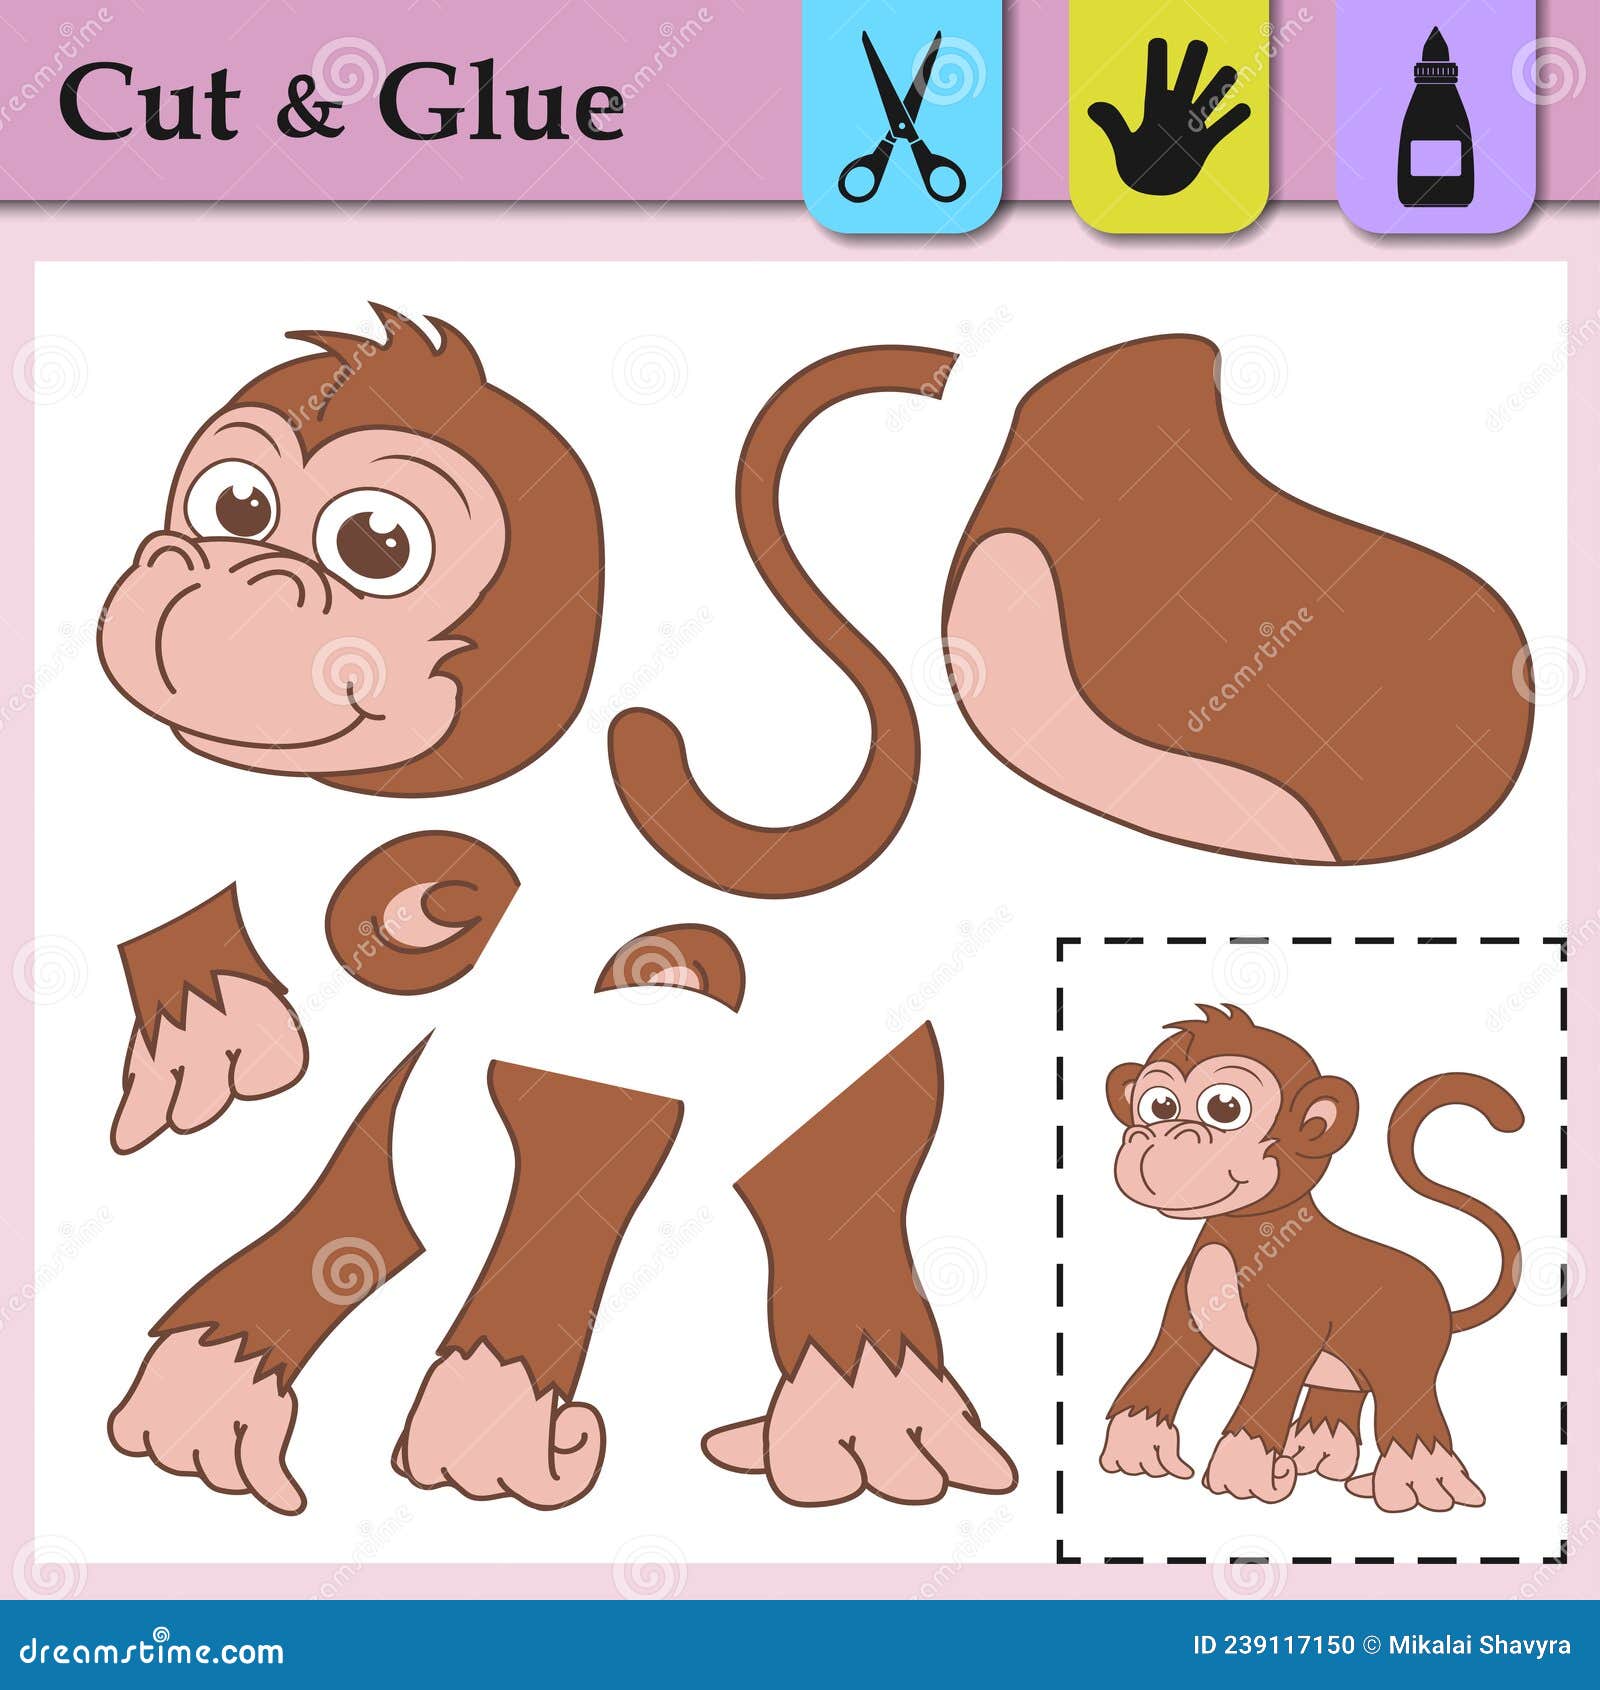 paper-game-for-kids-create-the-applique-cute-monkey-cut-and-glue